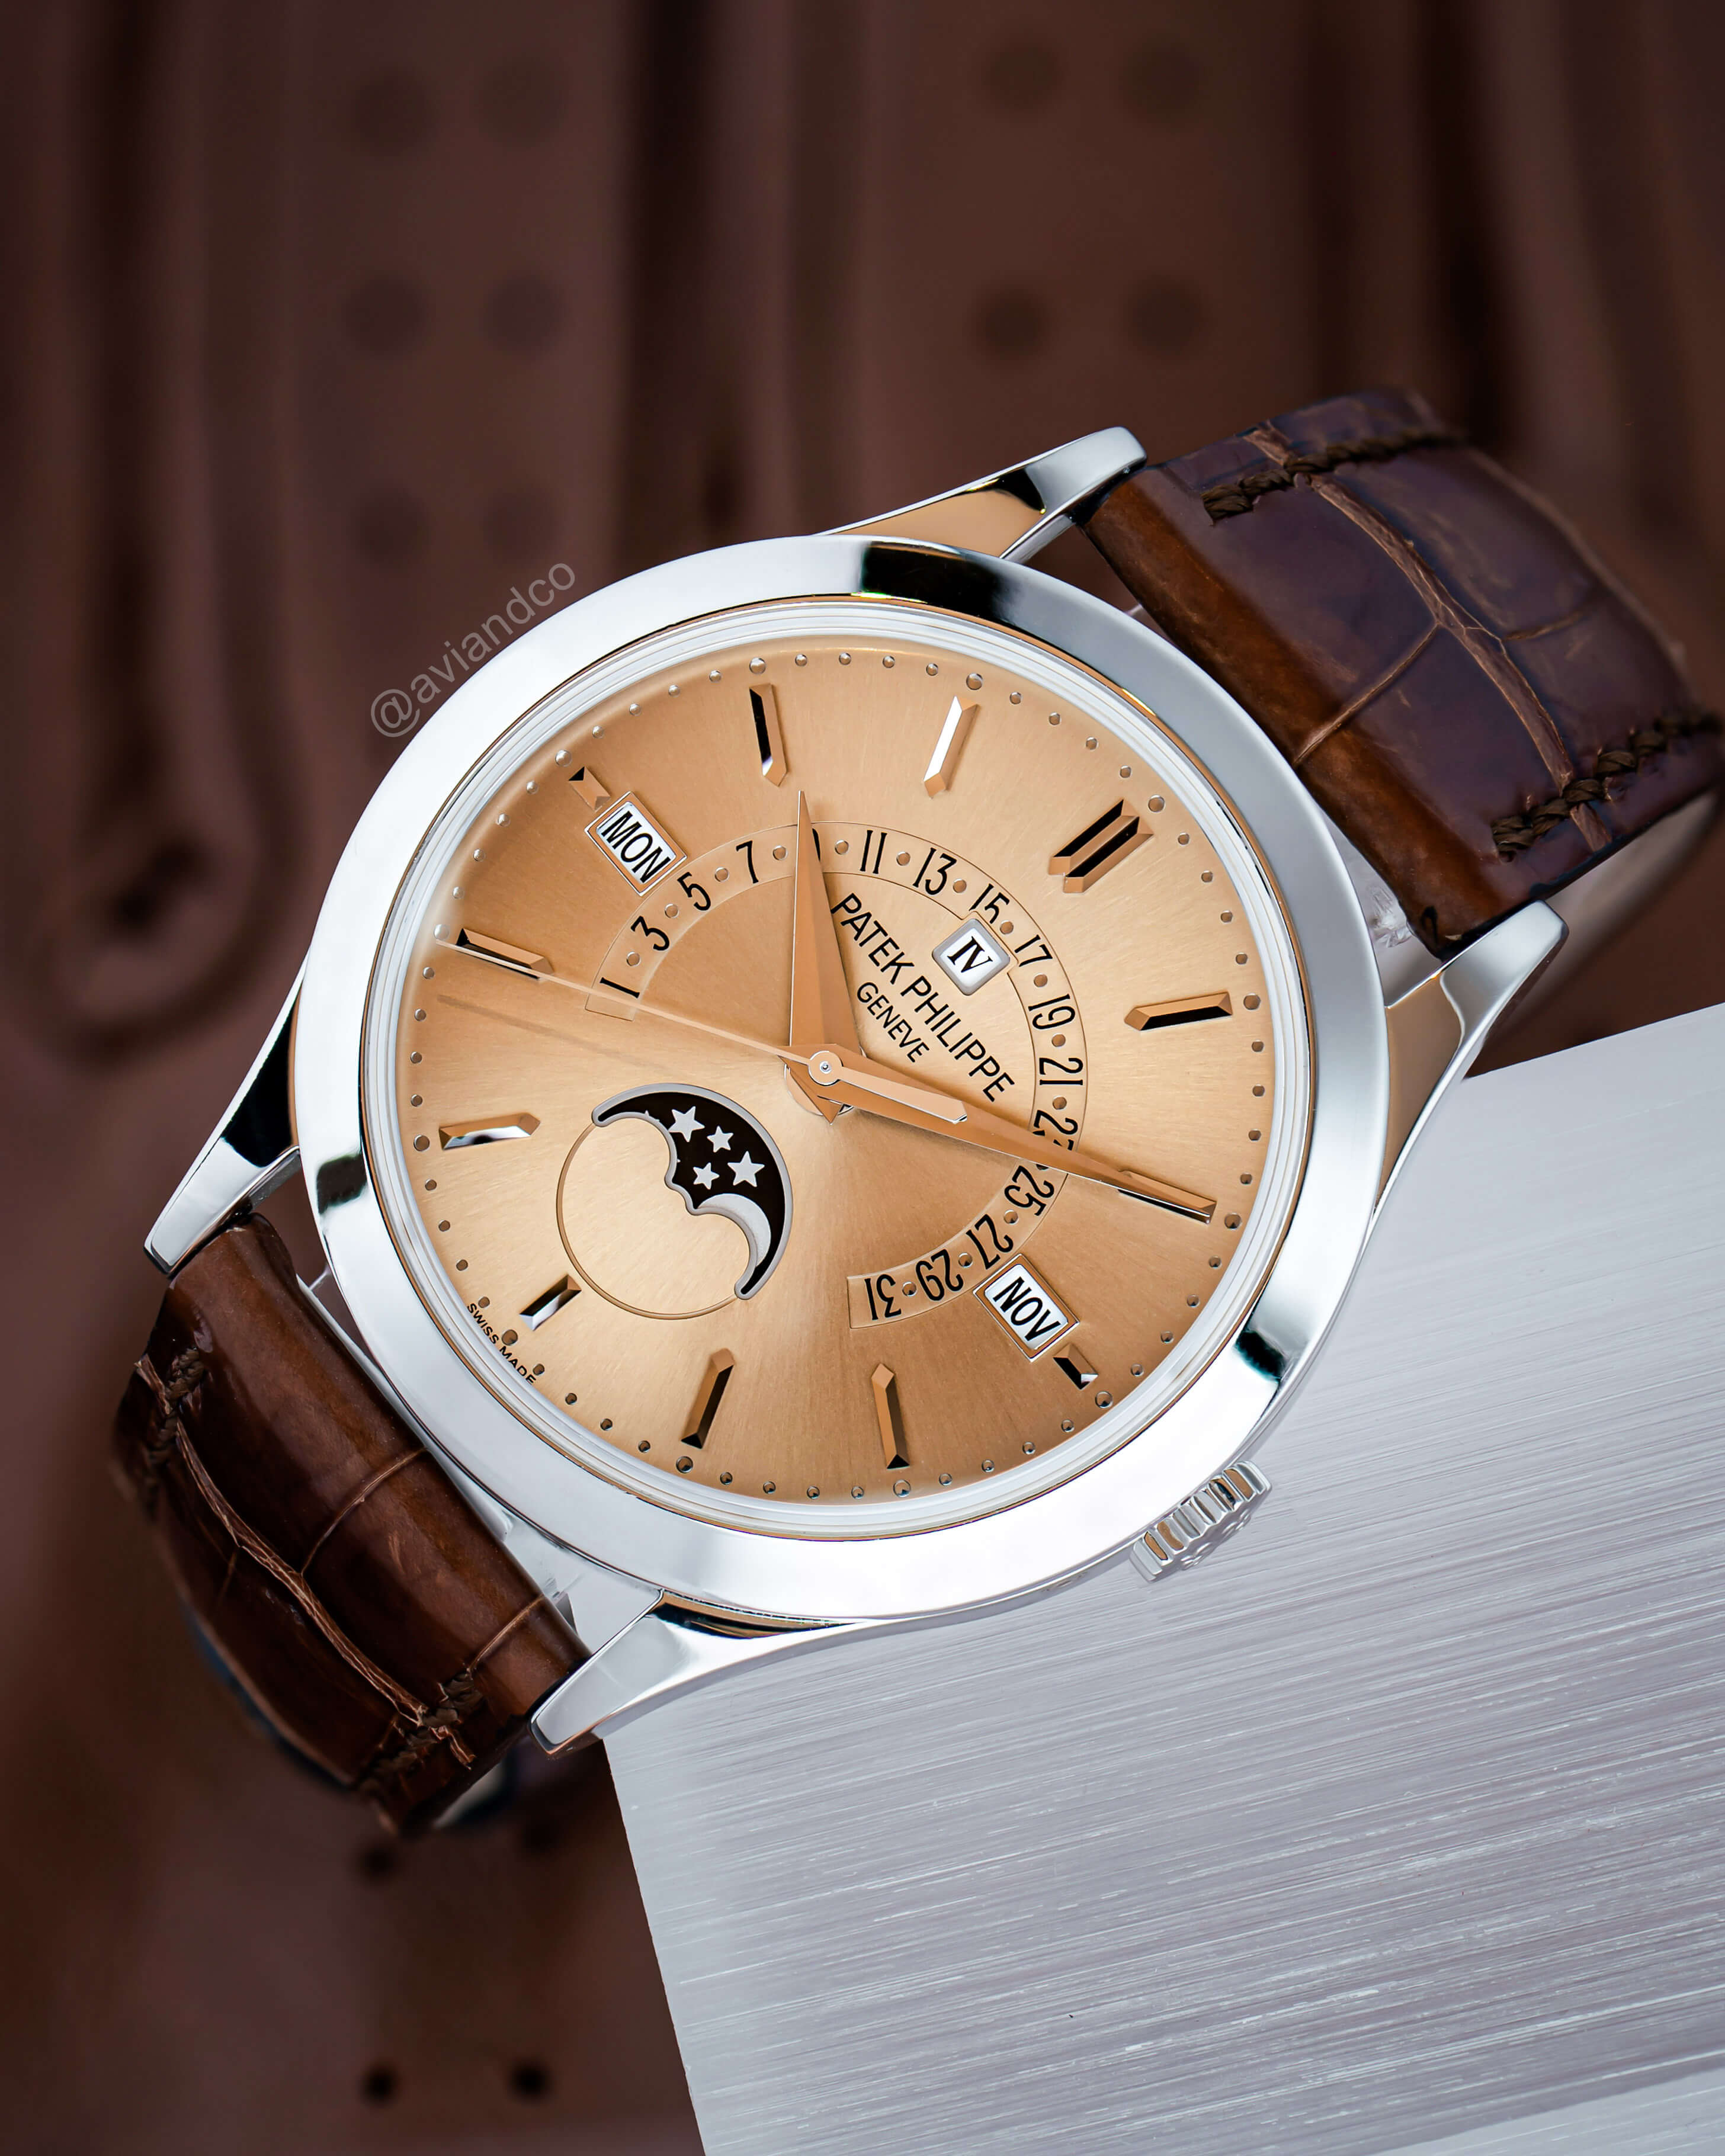 Platinum Timepiece with Perpetual Calendar, Brown Index Dial, Brown Leather Bracelet Displayed on a C-Ring on a Brown Leather Background.